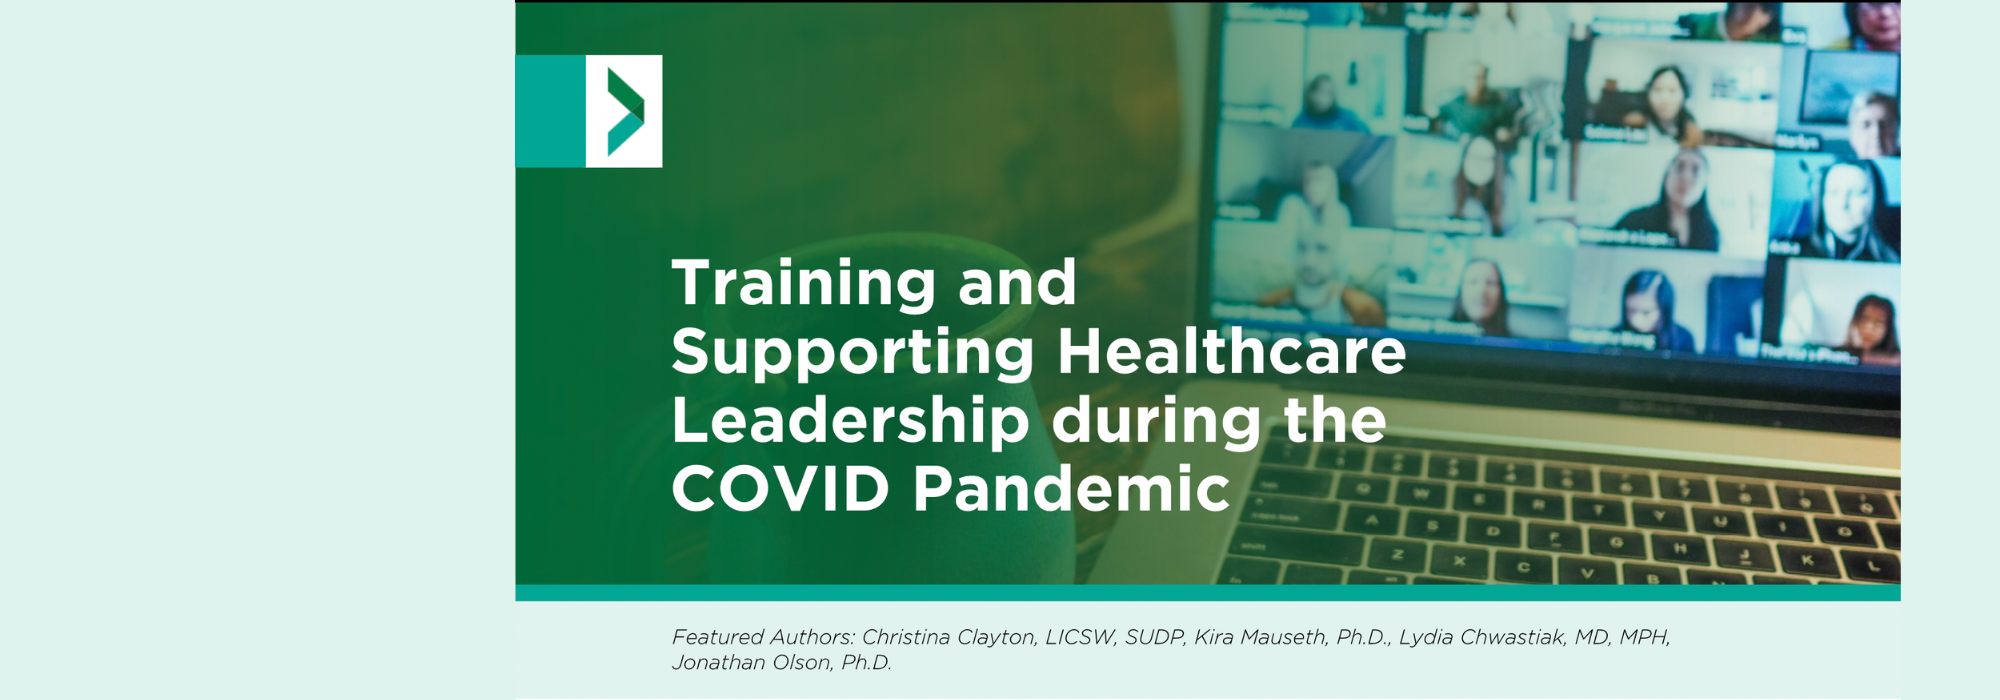 Image of a laptop with text over it reading: Training and Supporting Healthcare Leadership during the COVID Pandemic